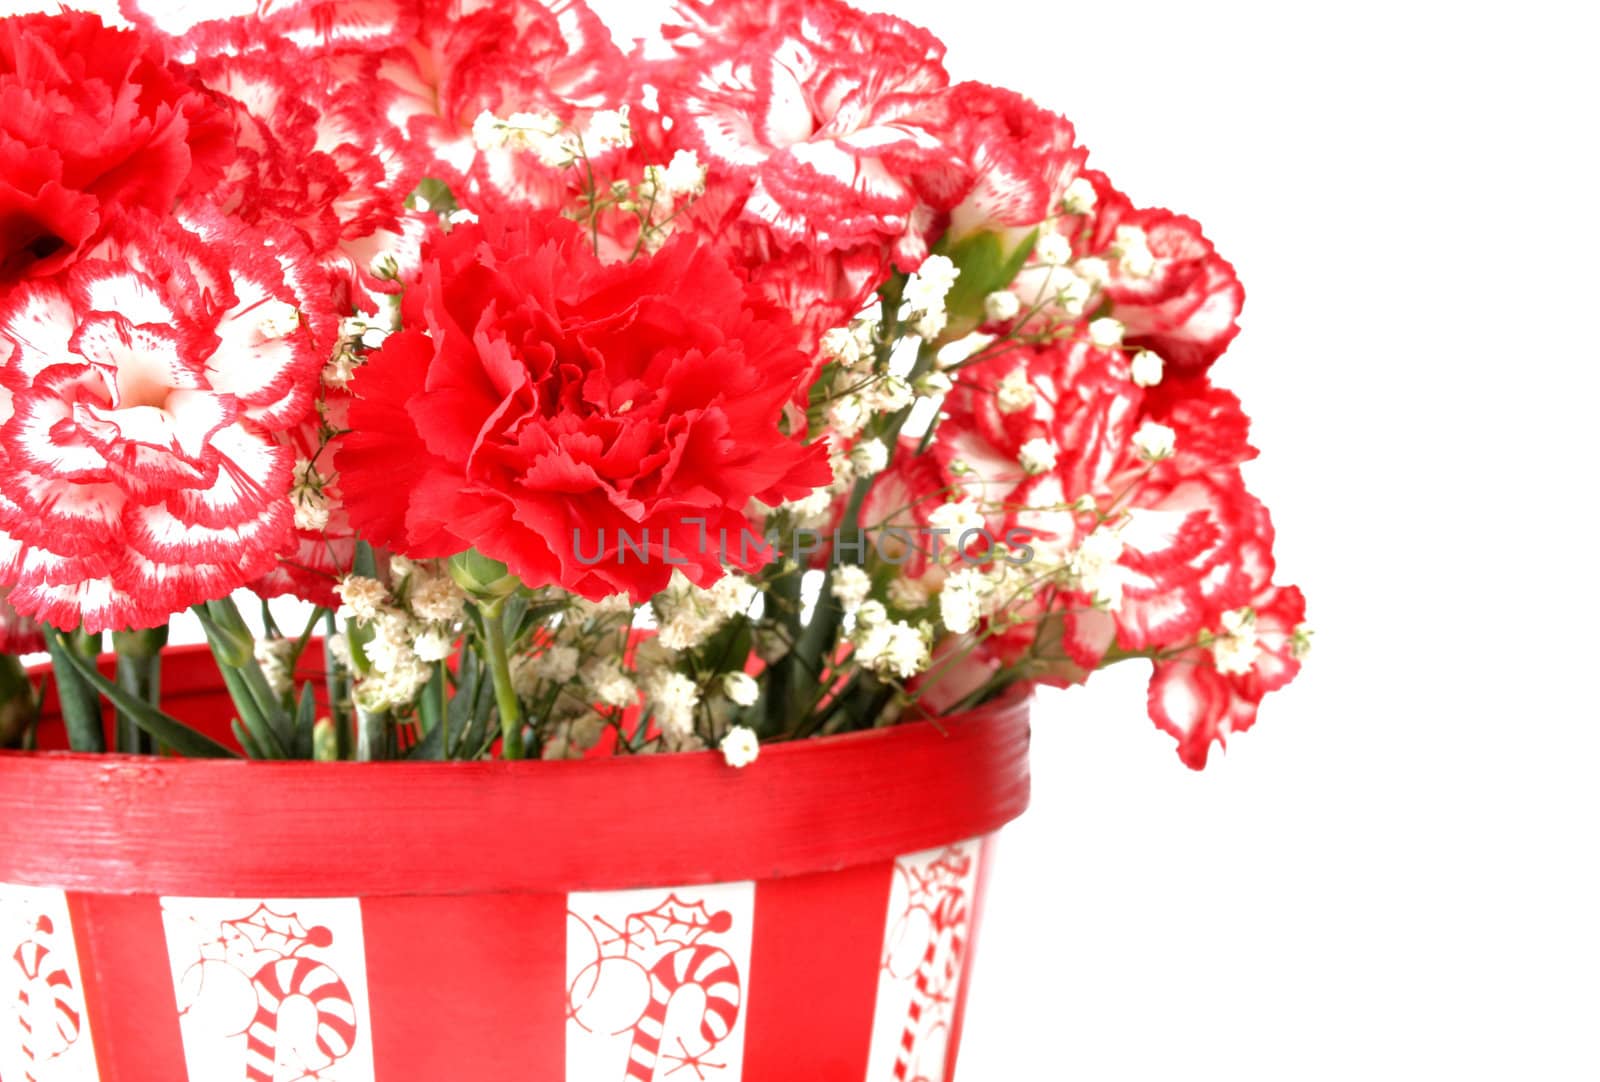 Basket of carnations with a Christmas theme.